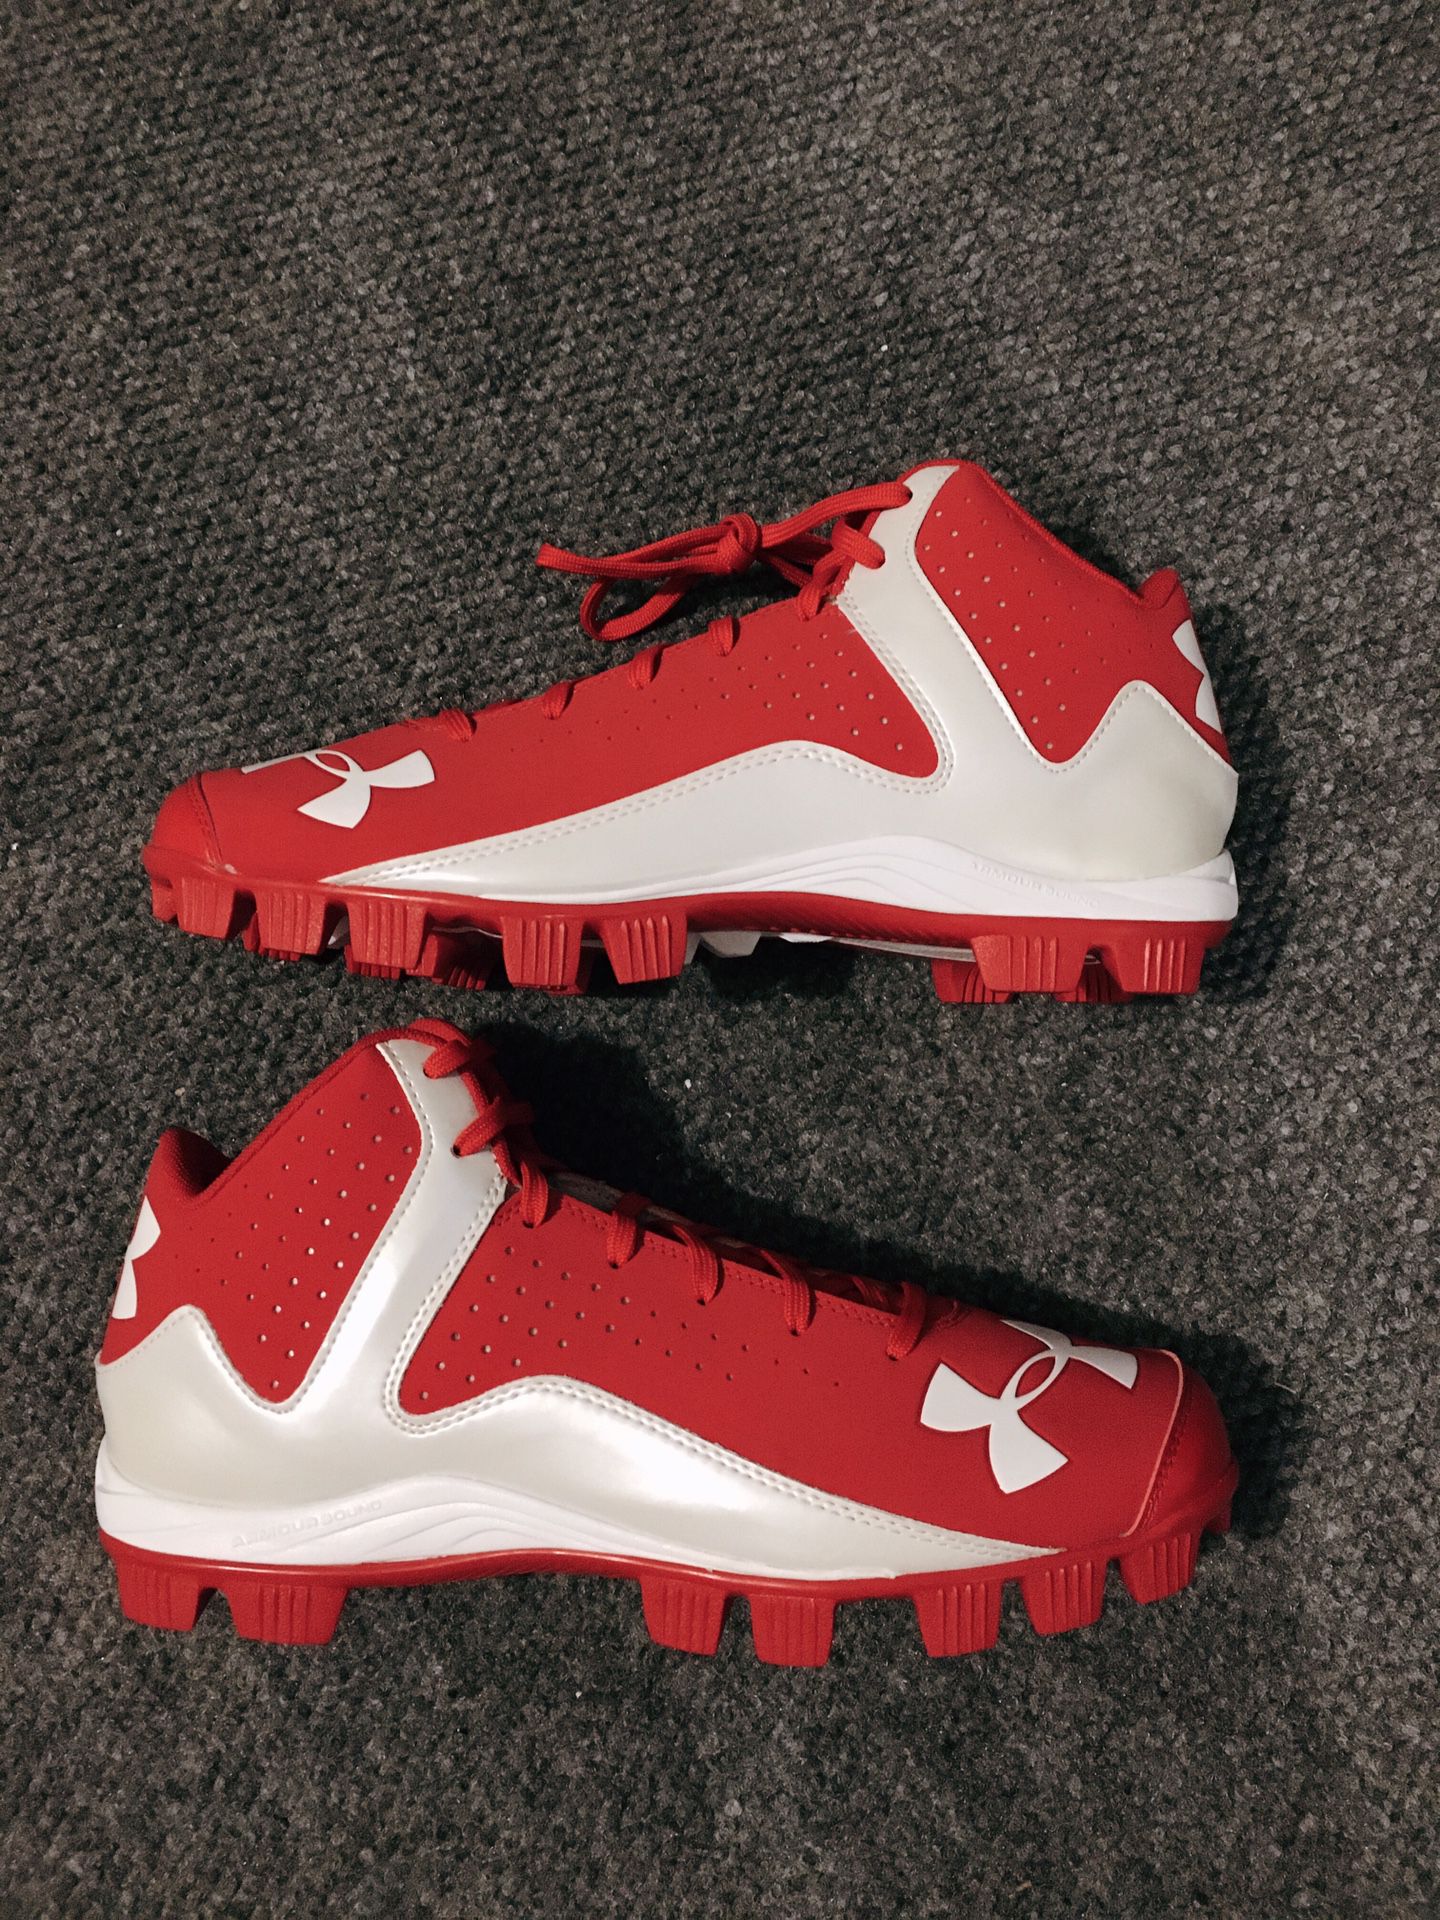 Baseball cleats red size 11